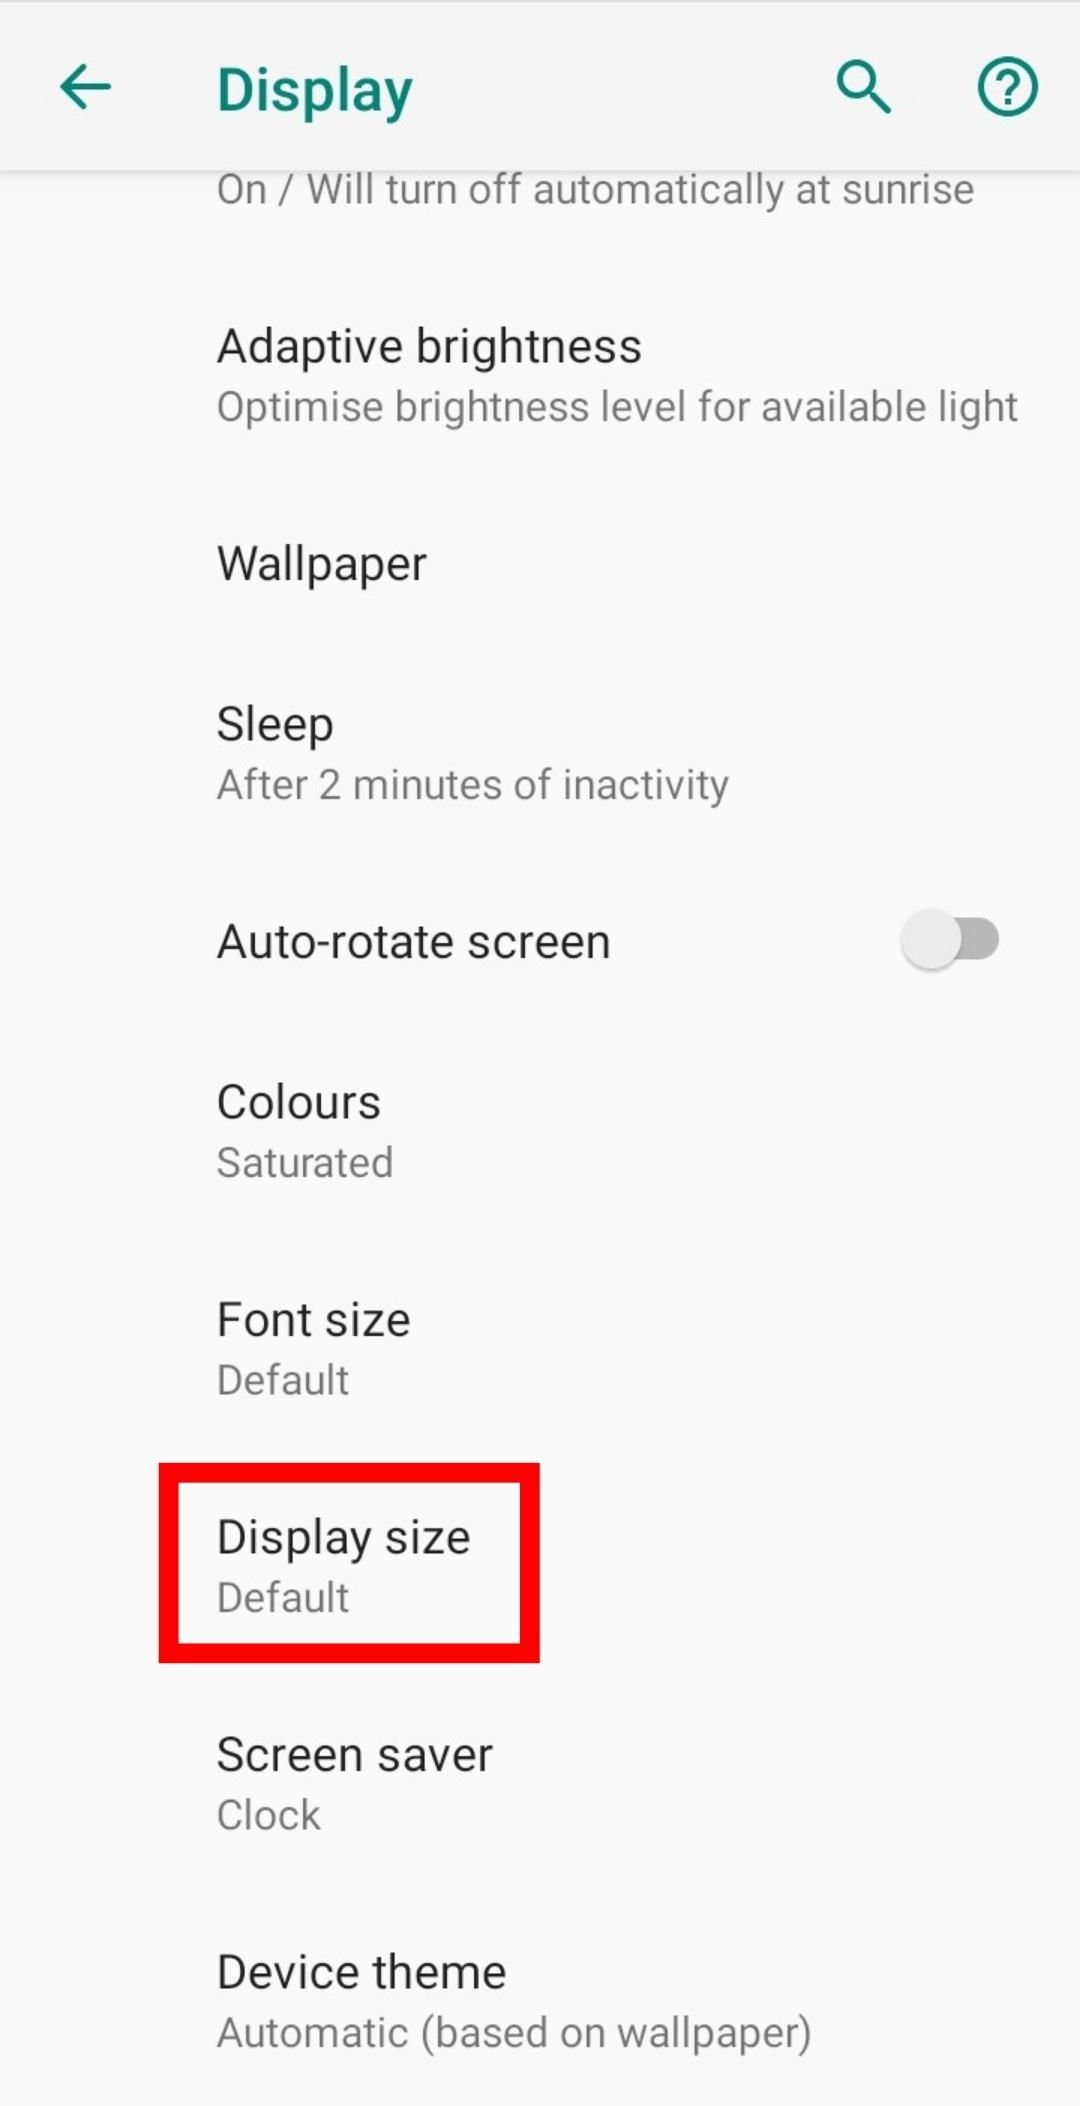 The displaysize setting in Android